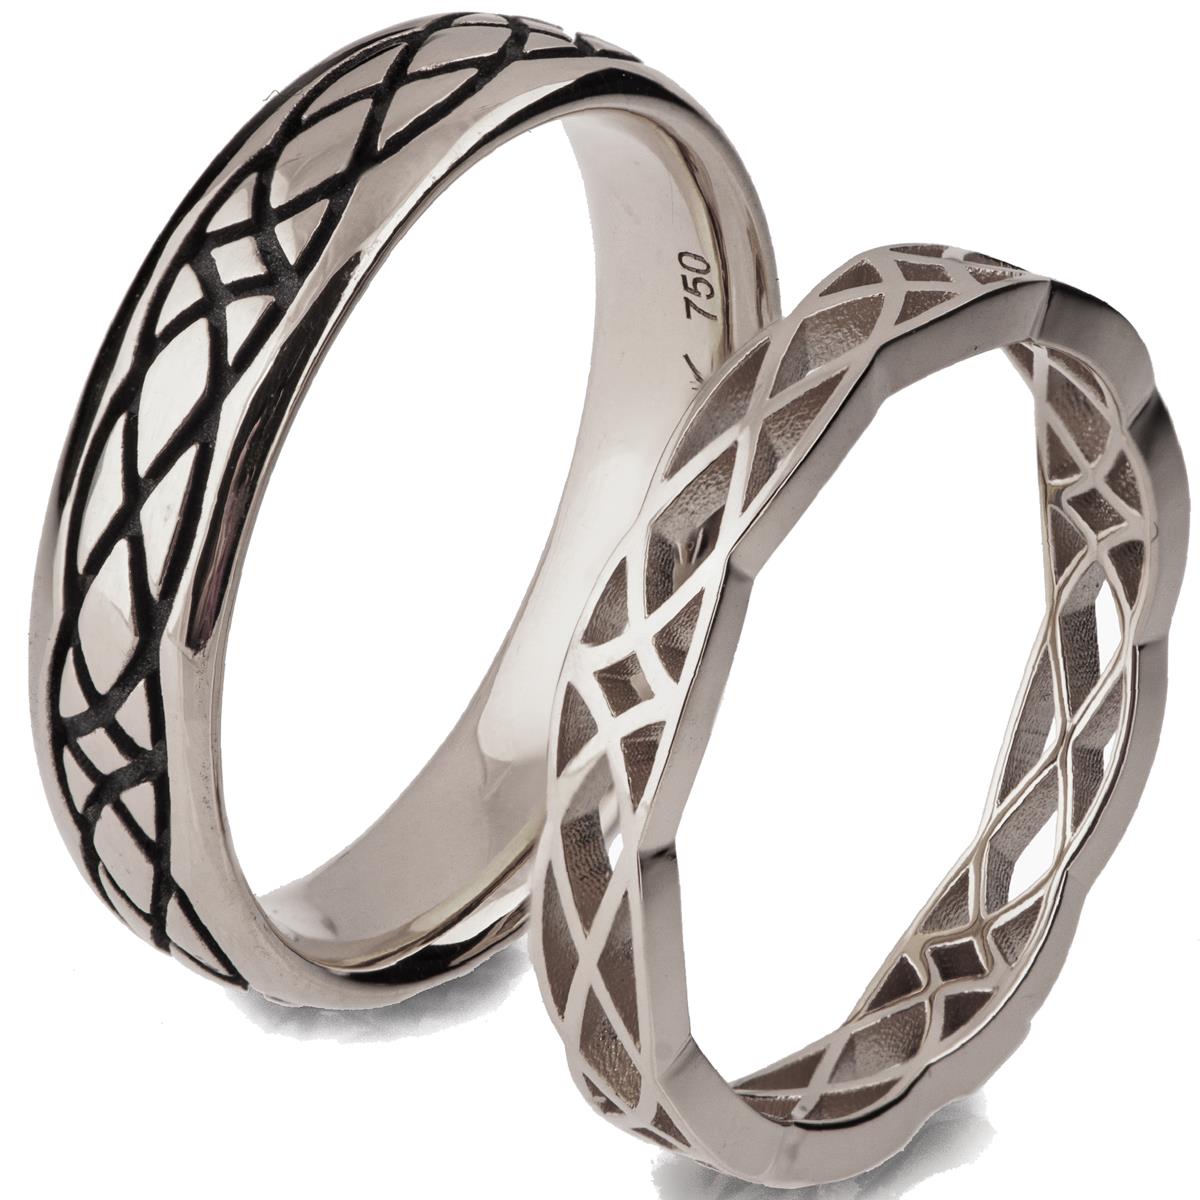 His and hers wedding rings Matching wedding bands in silver and 14k gold Celtic wedding bands